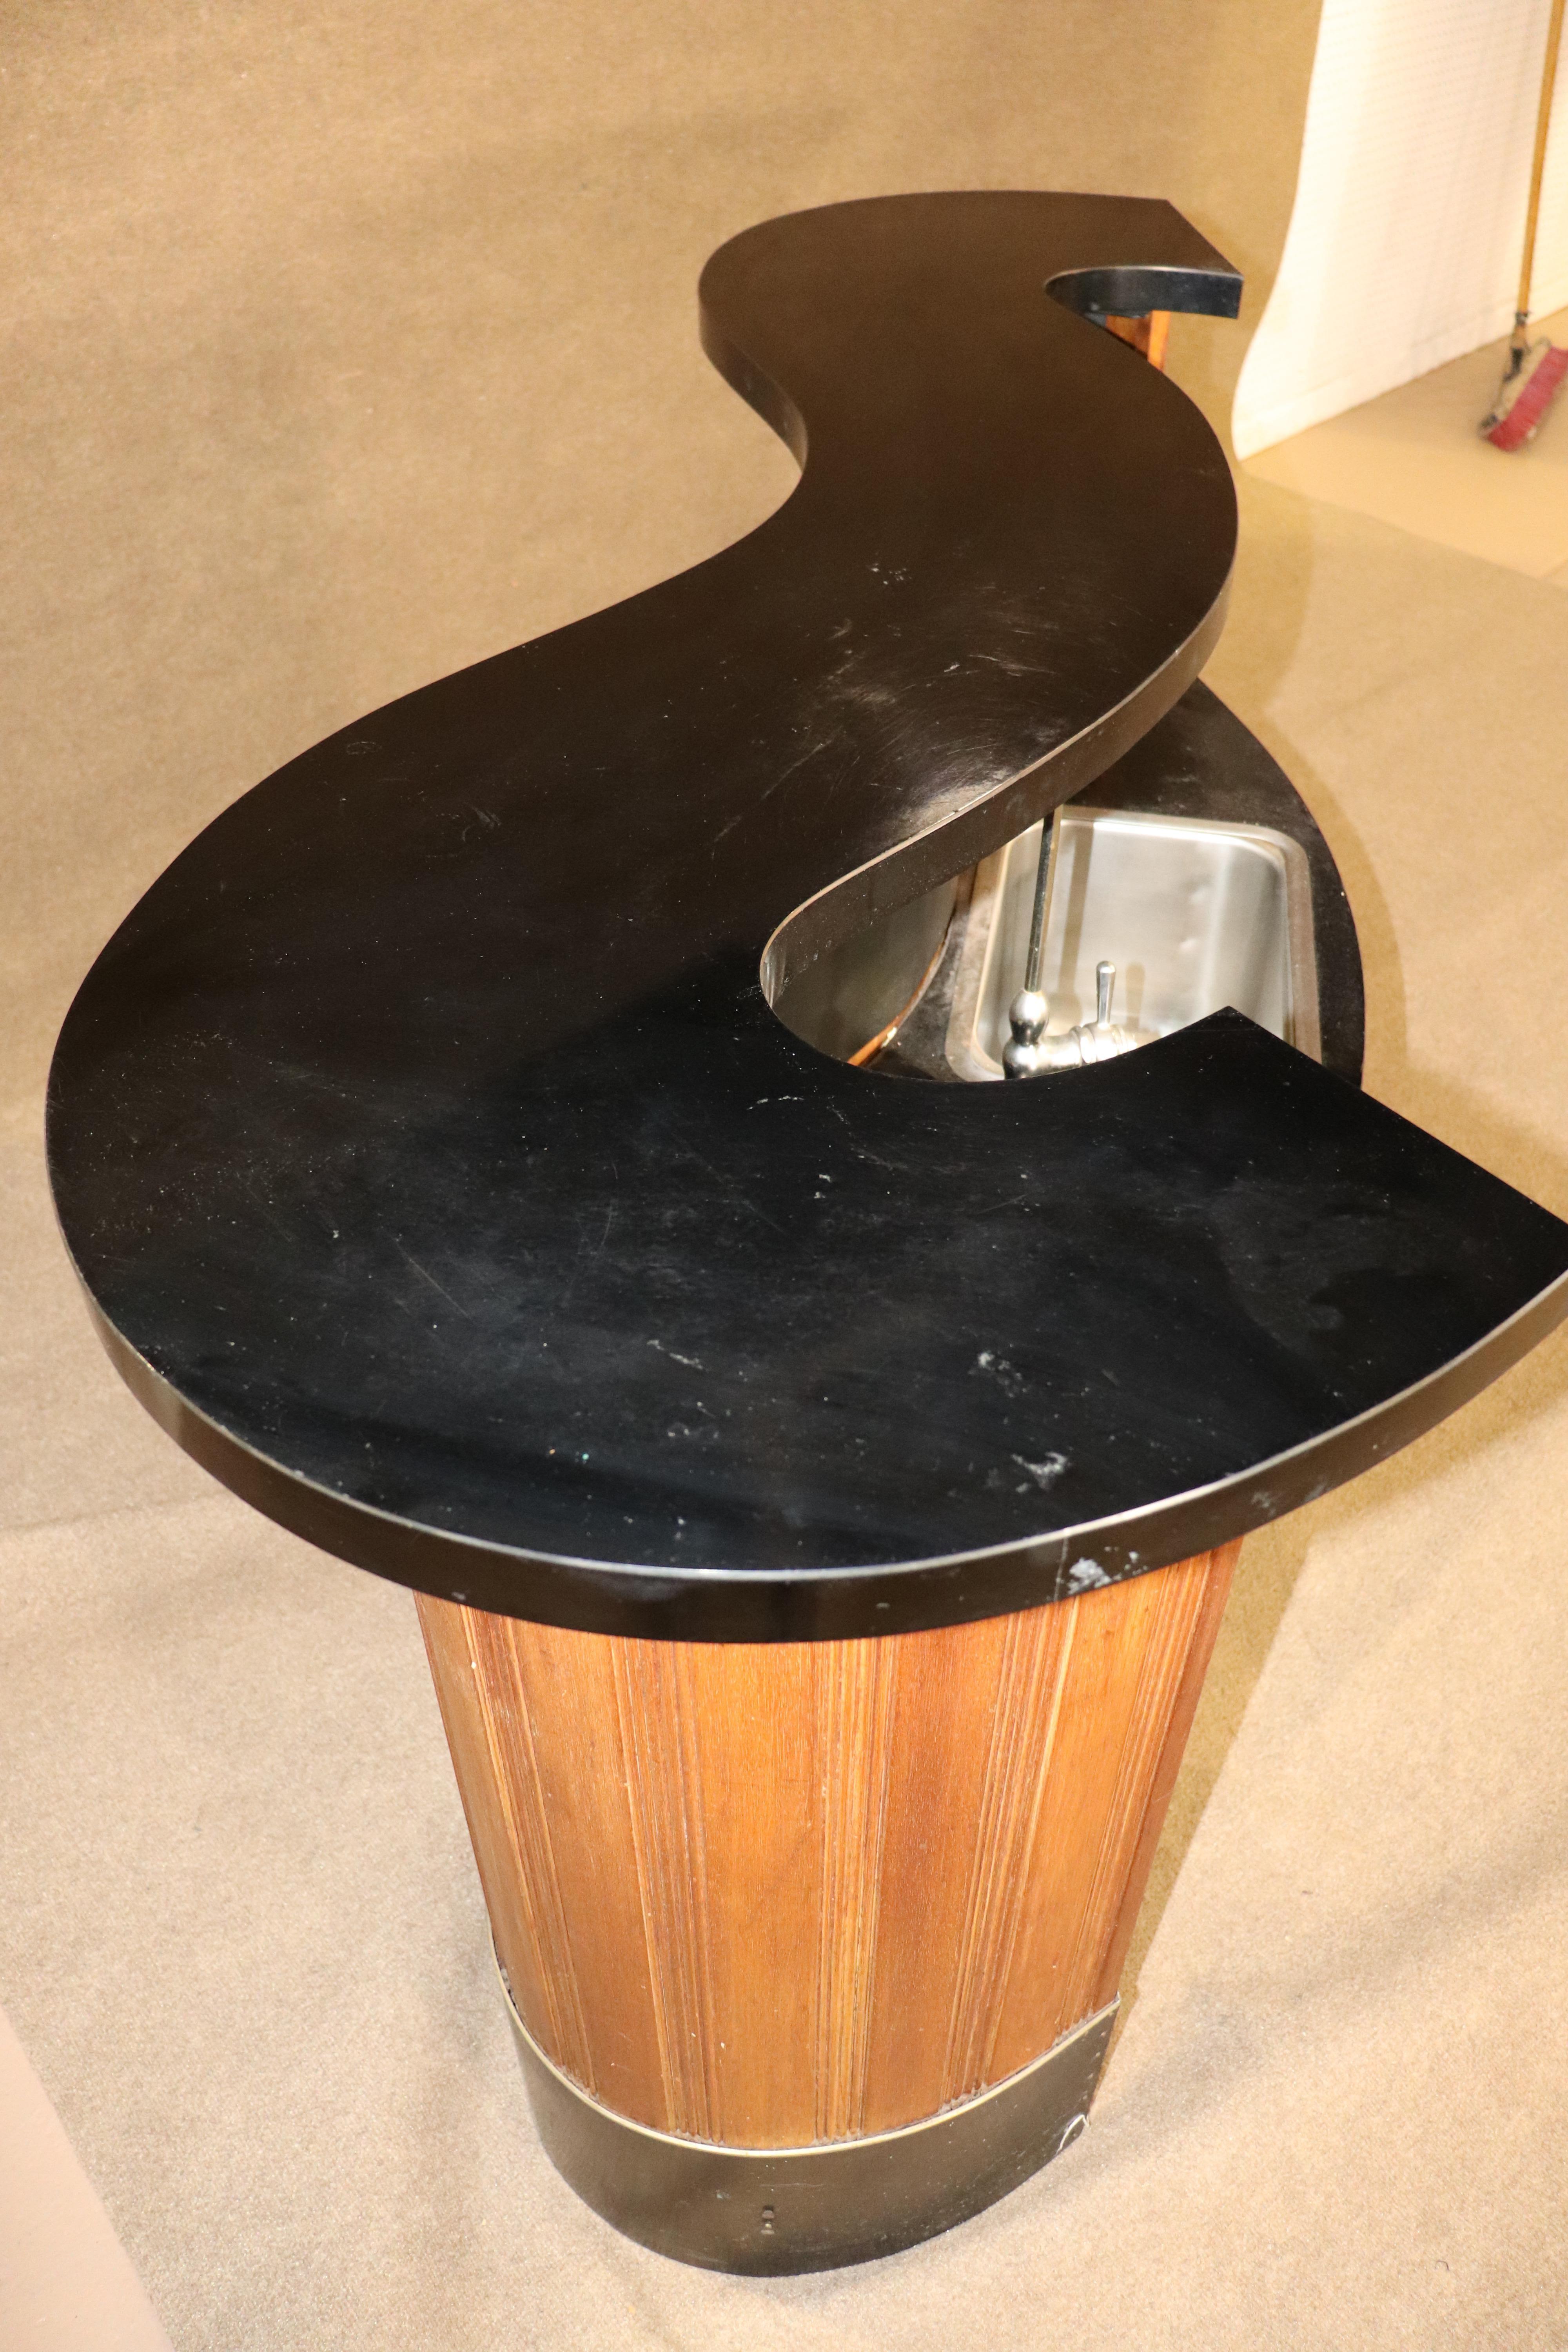 Mid-Century Modern home bar with sink and water hook up. This wet bar has a fun winding top. 
Please confirm location NY or NJ.